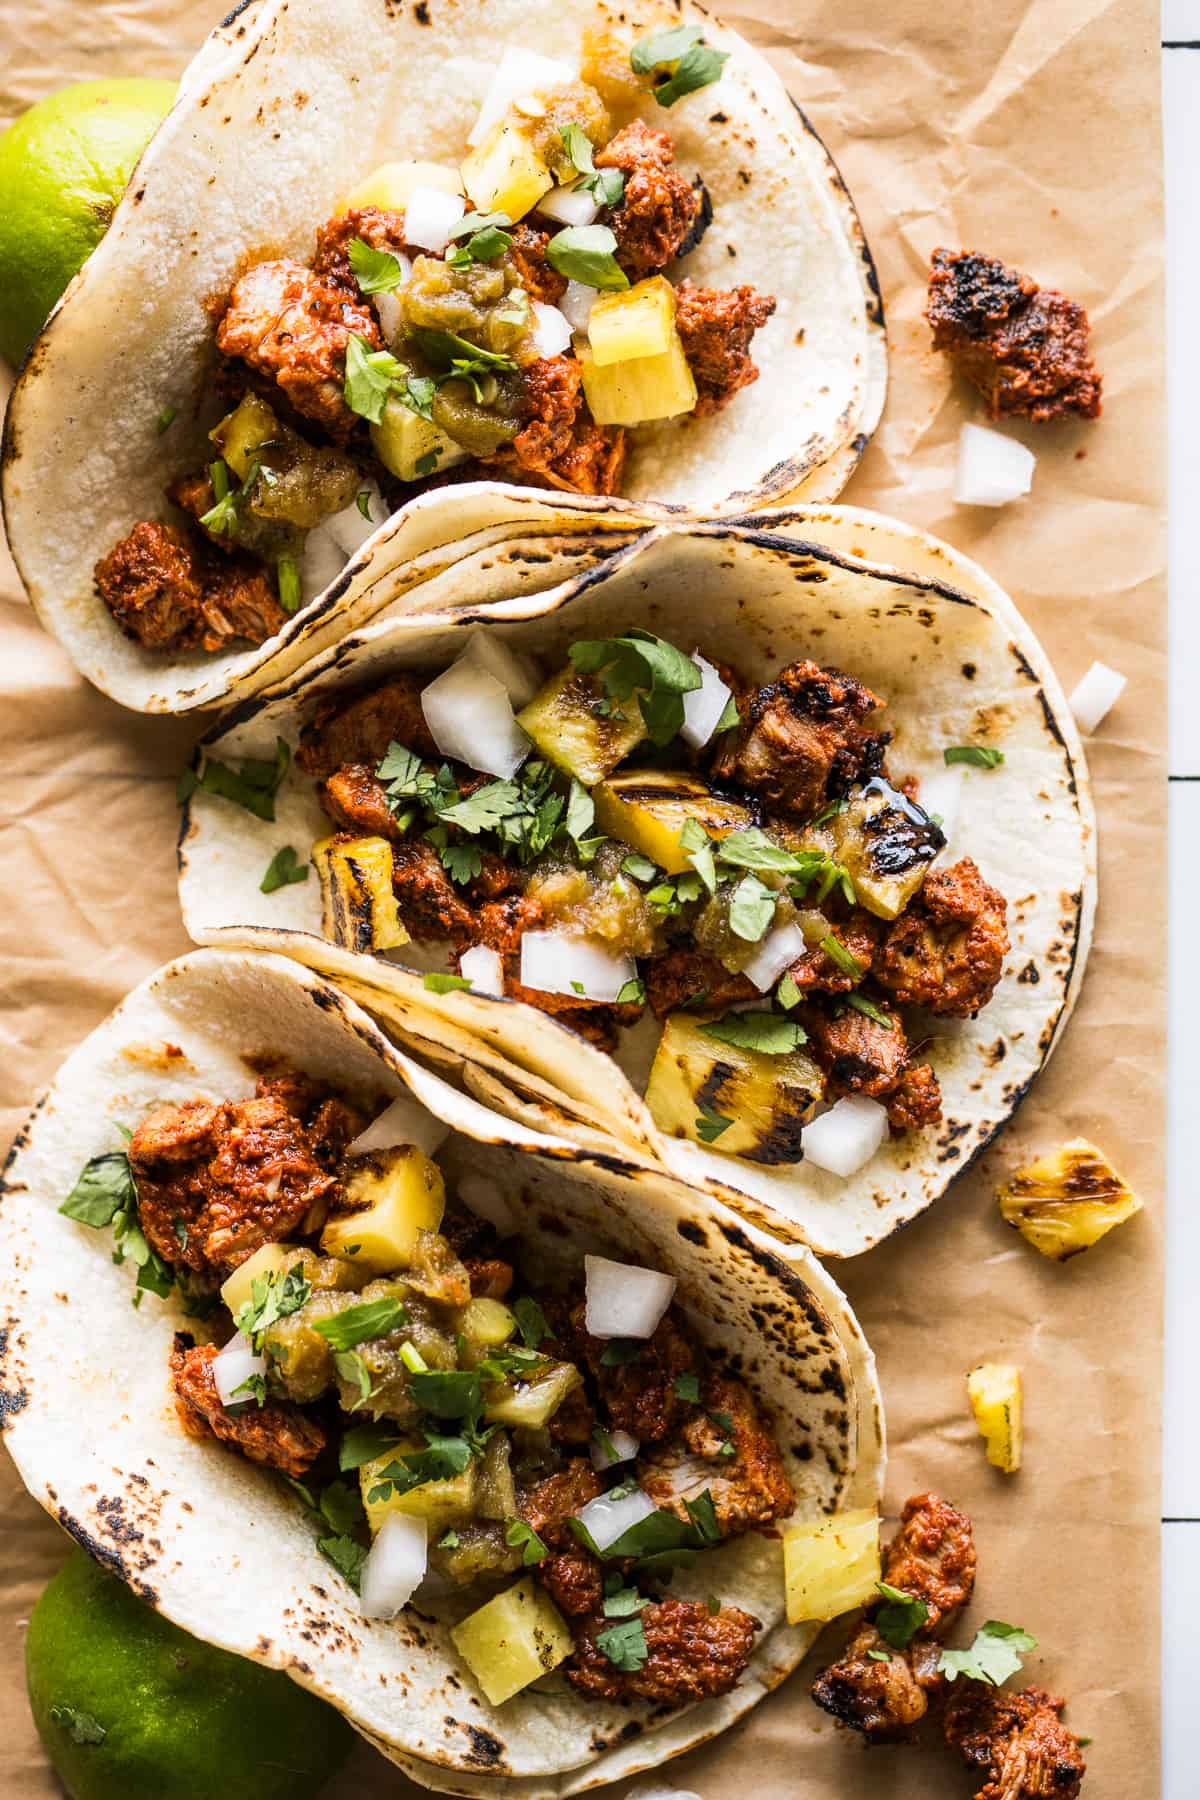 Tacos al pastor topped with grilled pineapple, cilantro, and white onion.